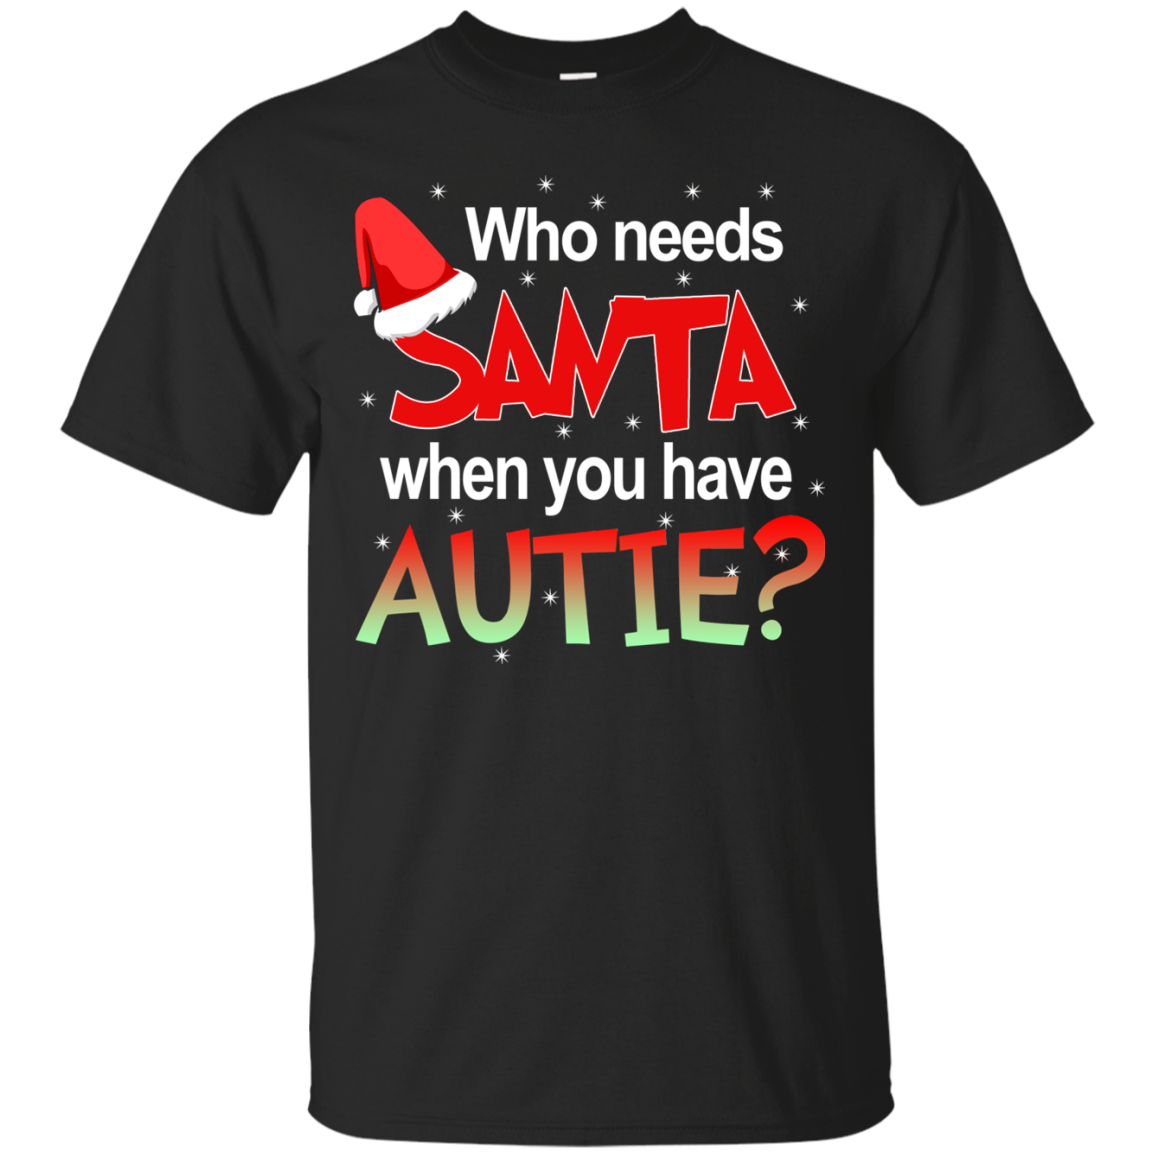 Who needs Santa when you have Autie shirt, sweater, hoodie